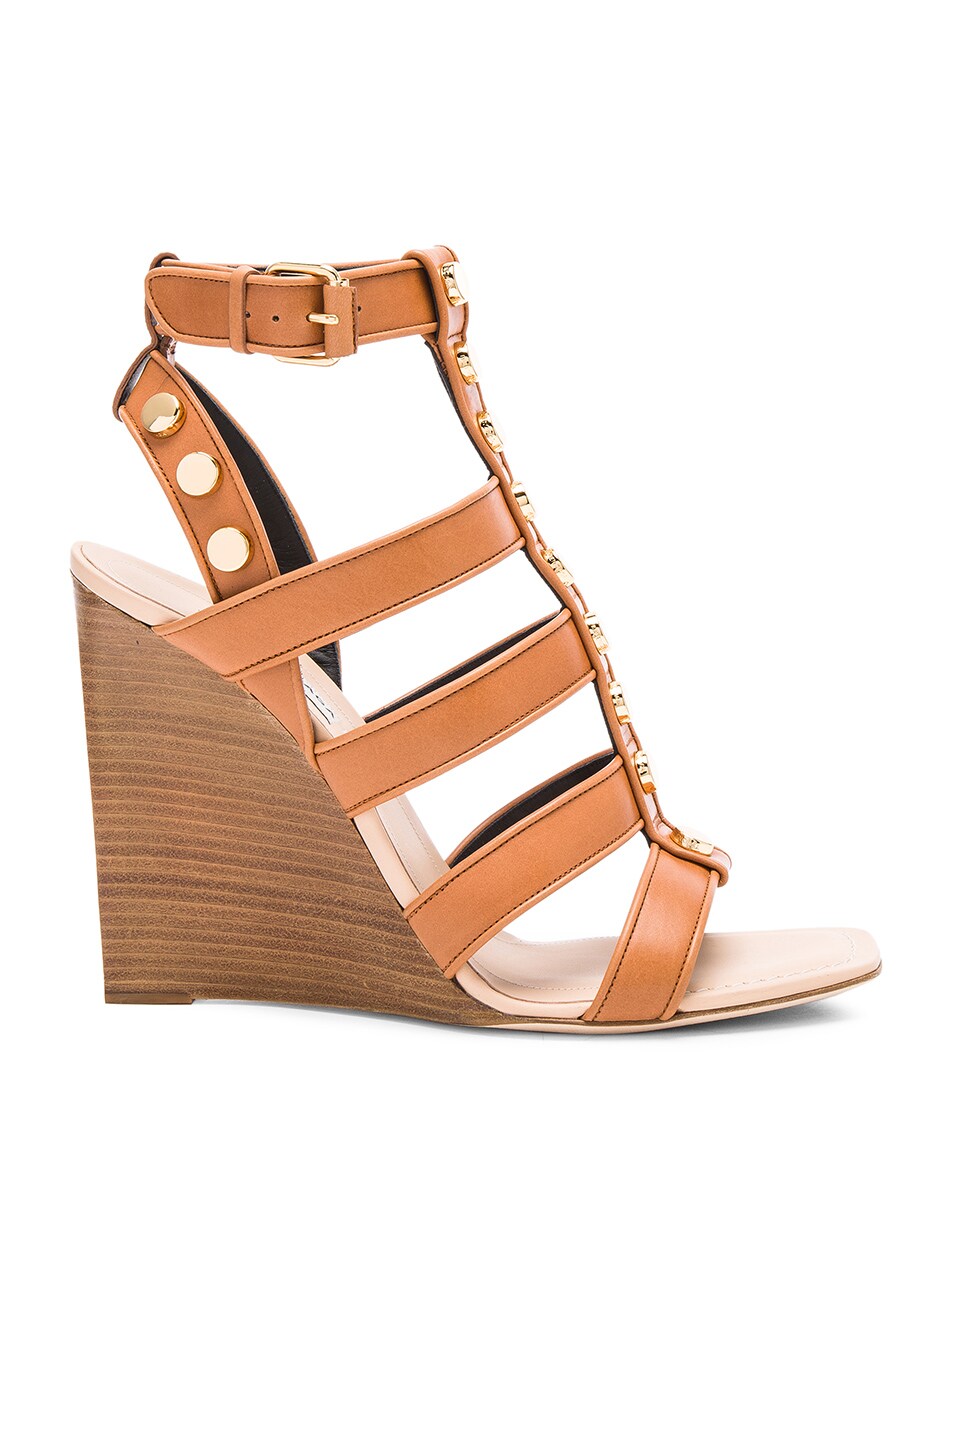 Image 1 of Balenciaga Studded Leather Wedge Sandals in Cognac